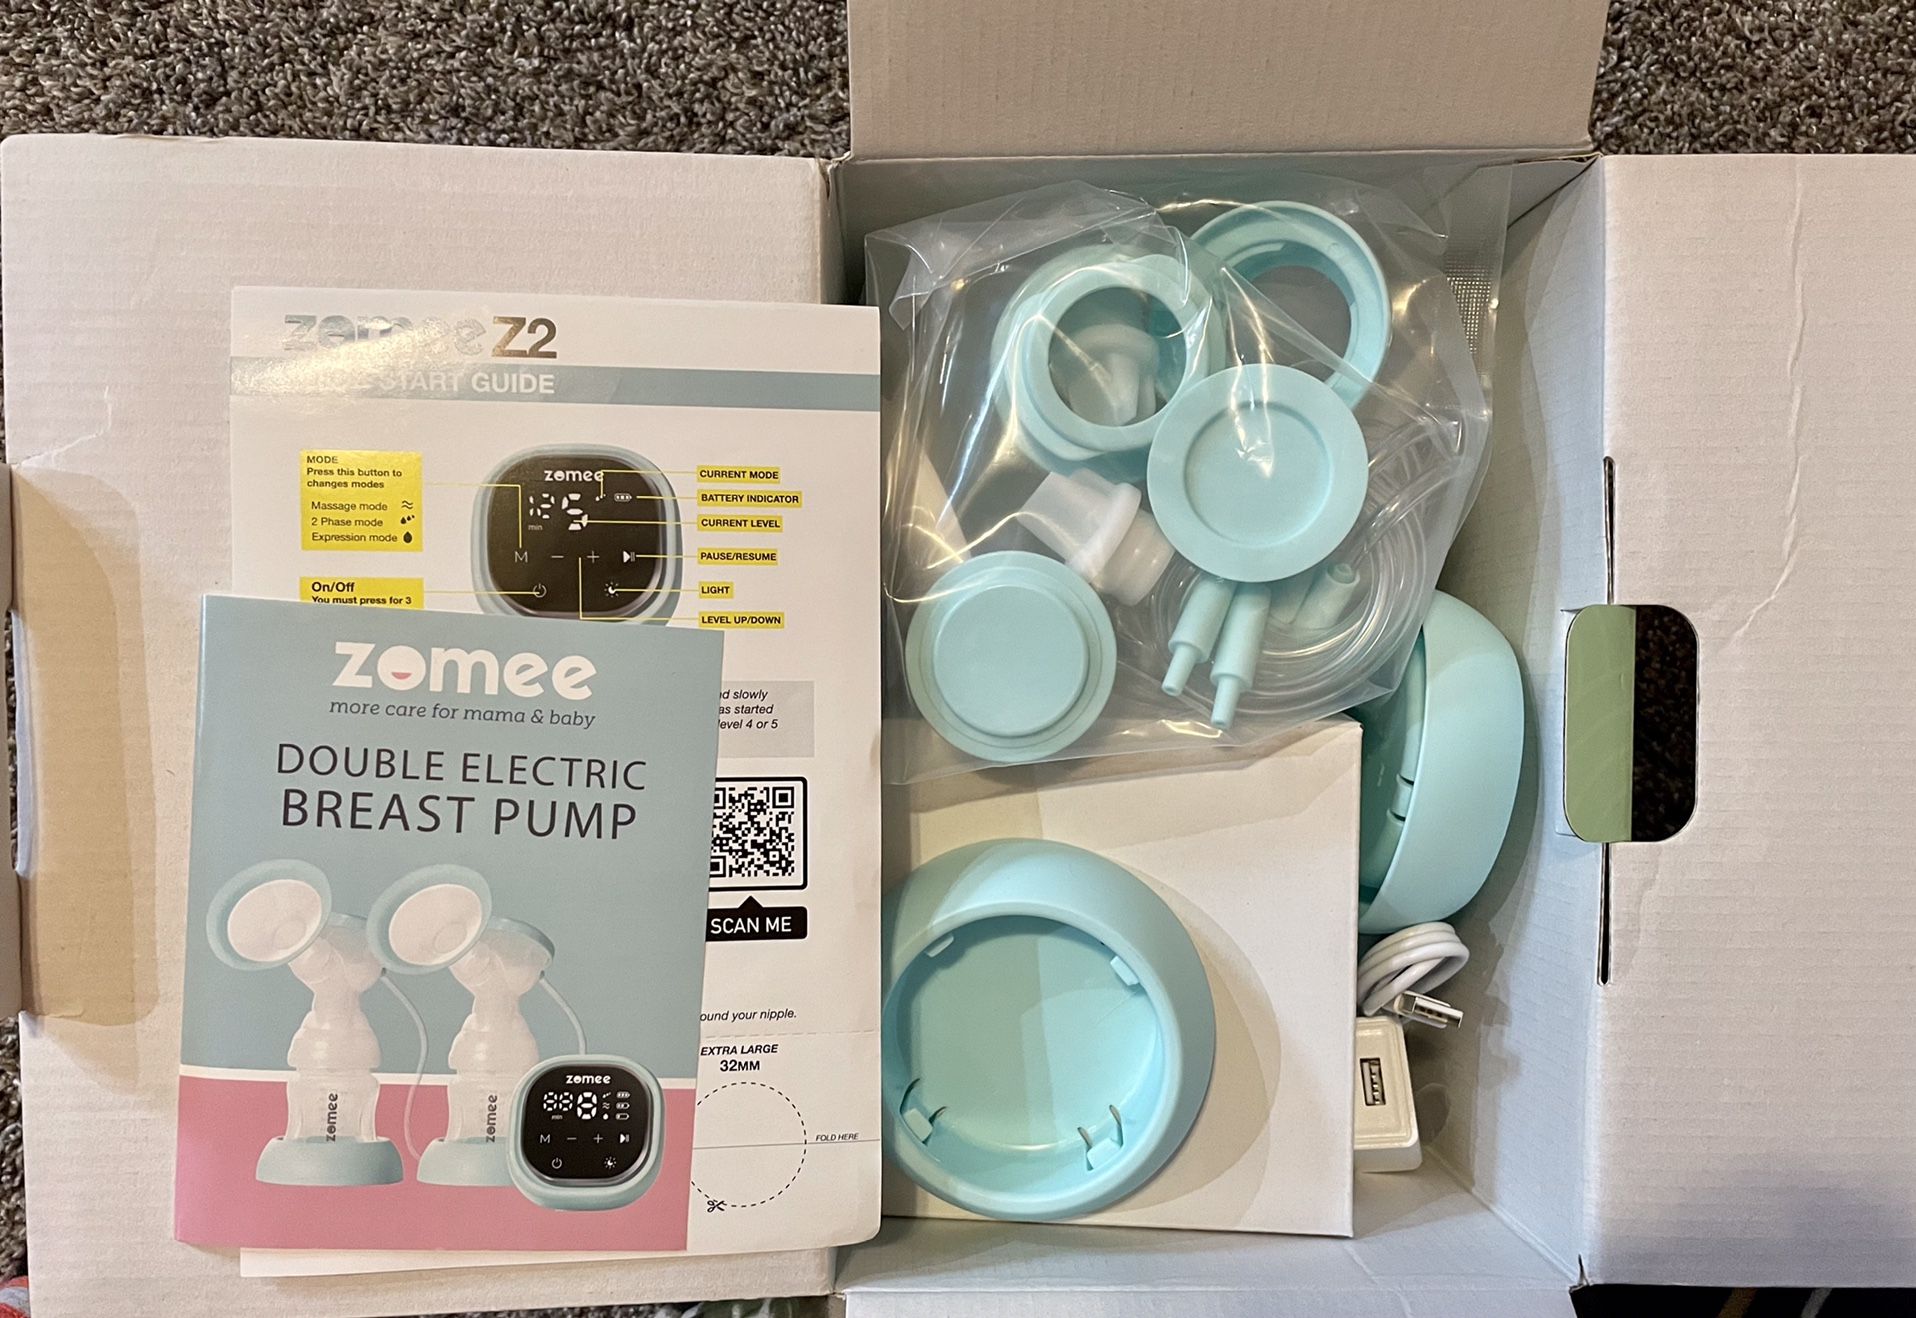 Zomee Z2 Smart Double Electric Breast Pump